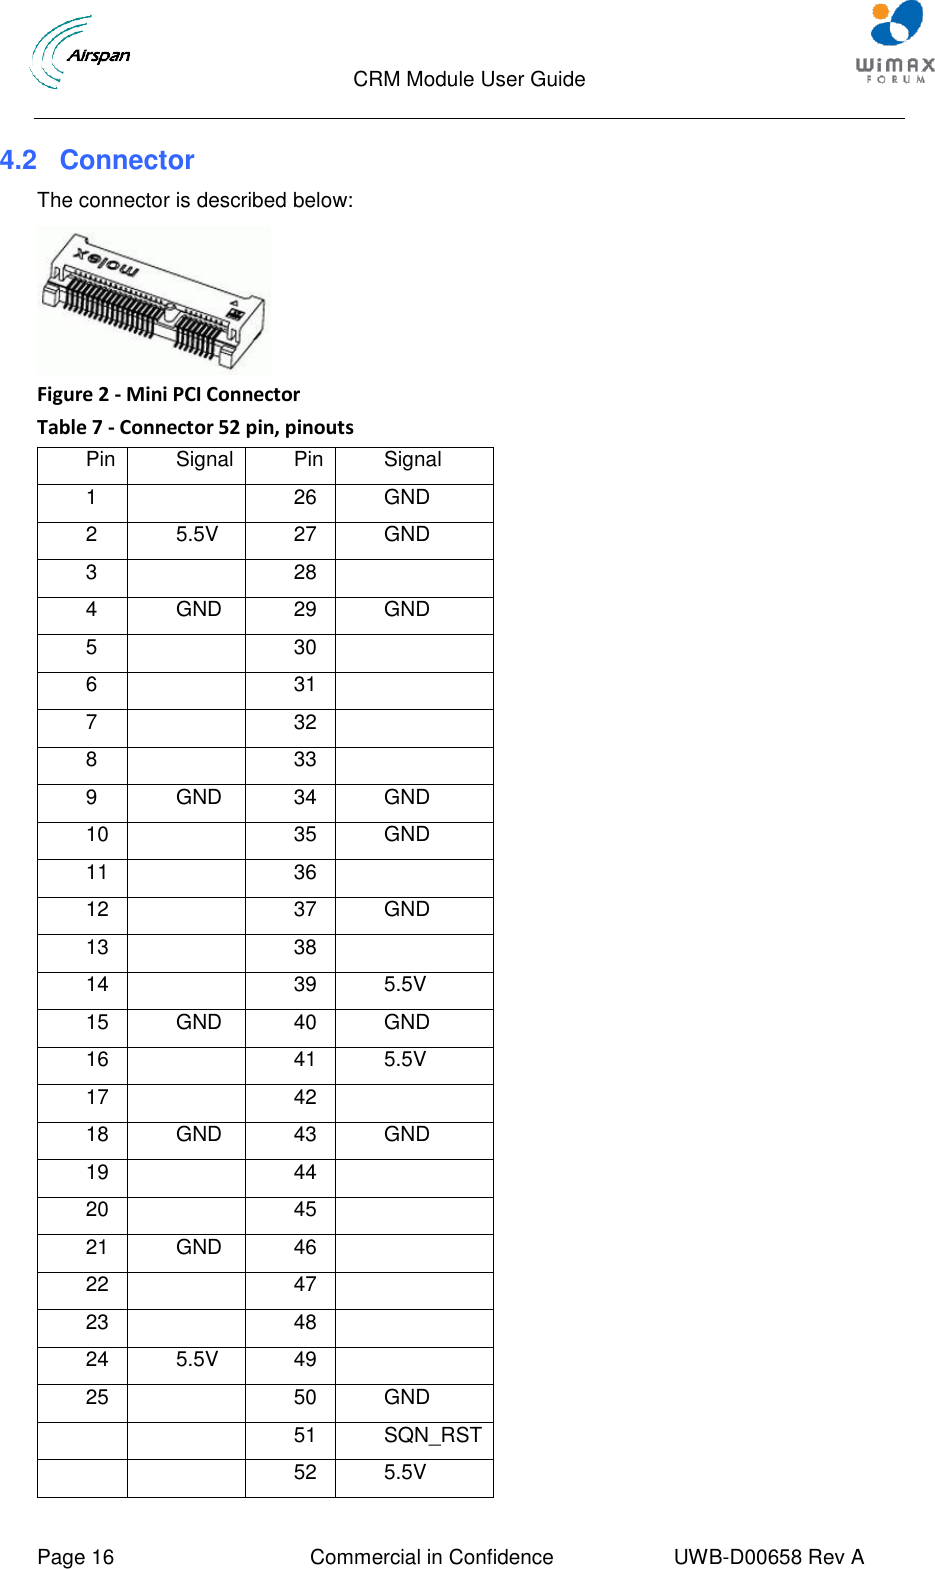                                  CRM Module User Guide     Page 16  Commercial in Confidence  UWB-D00658 Rev A    4.2  Connector The connector is described below:  Figure 2 - Mini PCI Connector Table 7 - Connector 52 pin, pinouts Pin  Signal Pin  Signal 1  26 GND 2 5.5V 27 GND 3  28  4 GND 29 GND 5  30  6  31  7  32  8  33  9 GND 34 GND 10  35 GND 11  36  12  37 GND 13  38  14  39 5.5V 15 GND 40 GND 16  41 5.5V 17  42  18 GND 43 GND 19  44  20  45  21 GND 46  22  47  23  48  24 5.5V 49  25  50 GND   51 SQN_RST   52 5.5V 